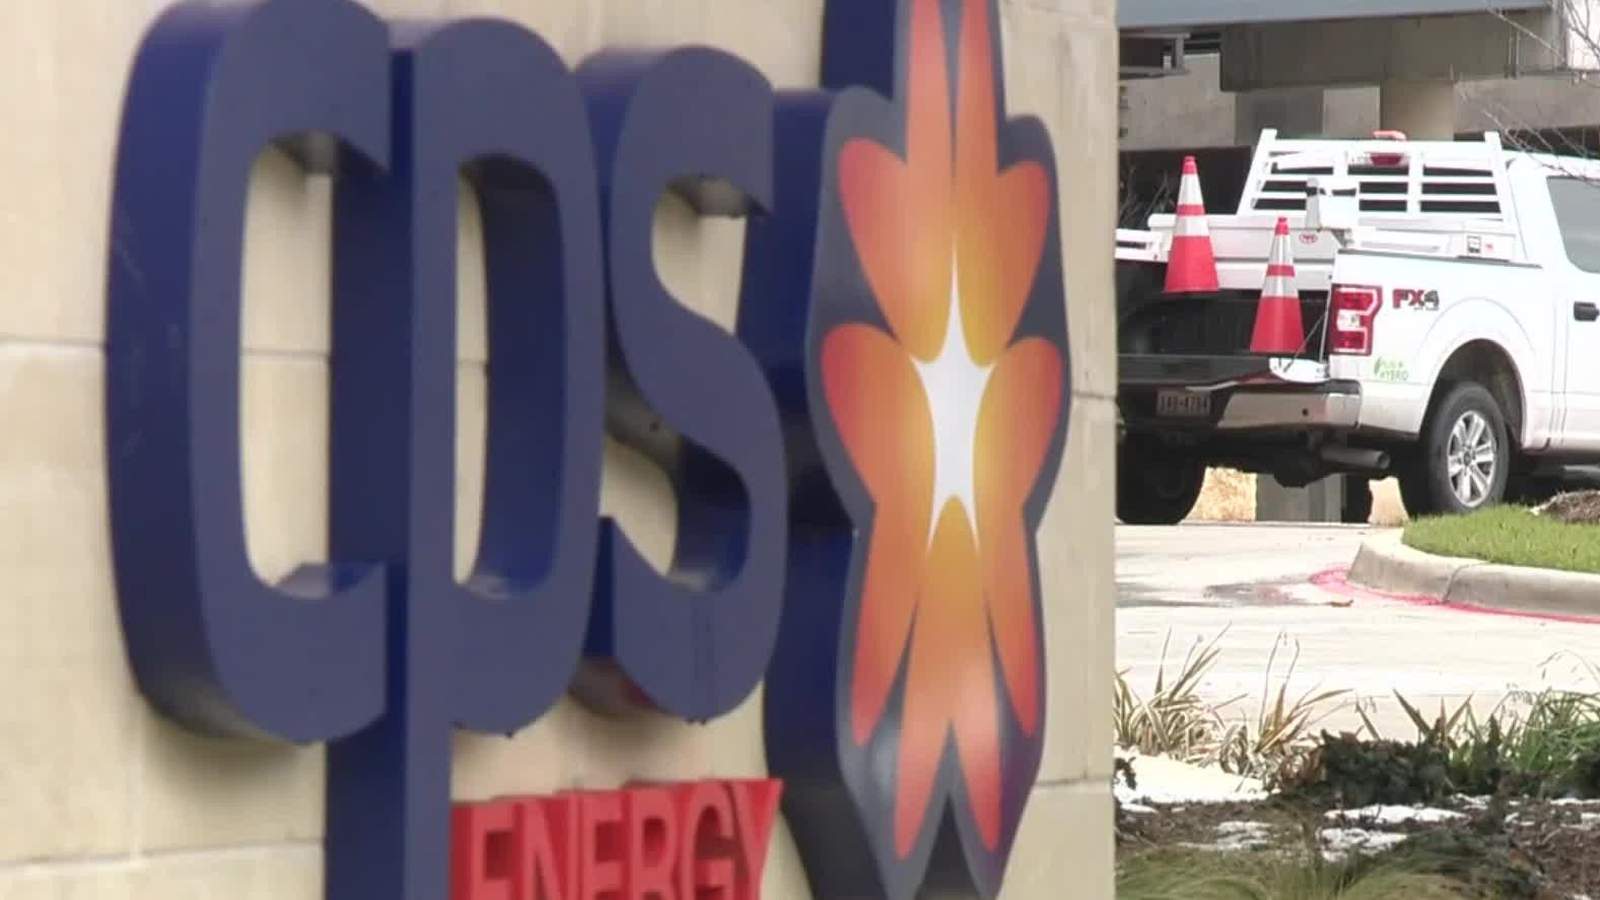 Frustrated CPS Energy customers criticize utility’s handling of winter energy crisis